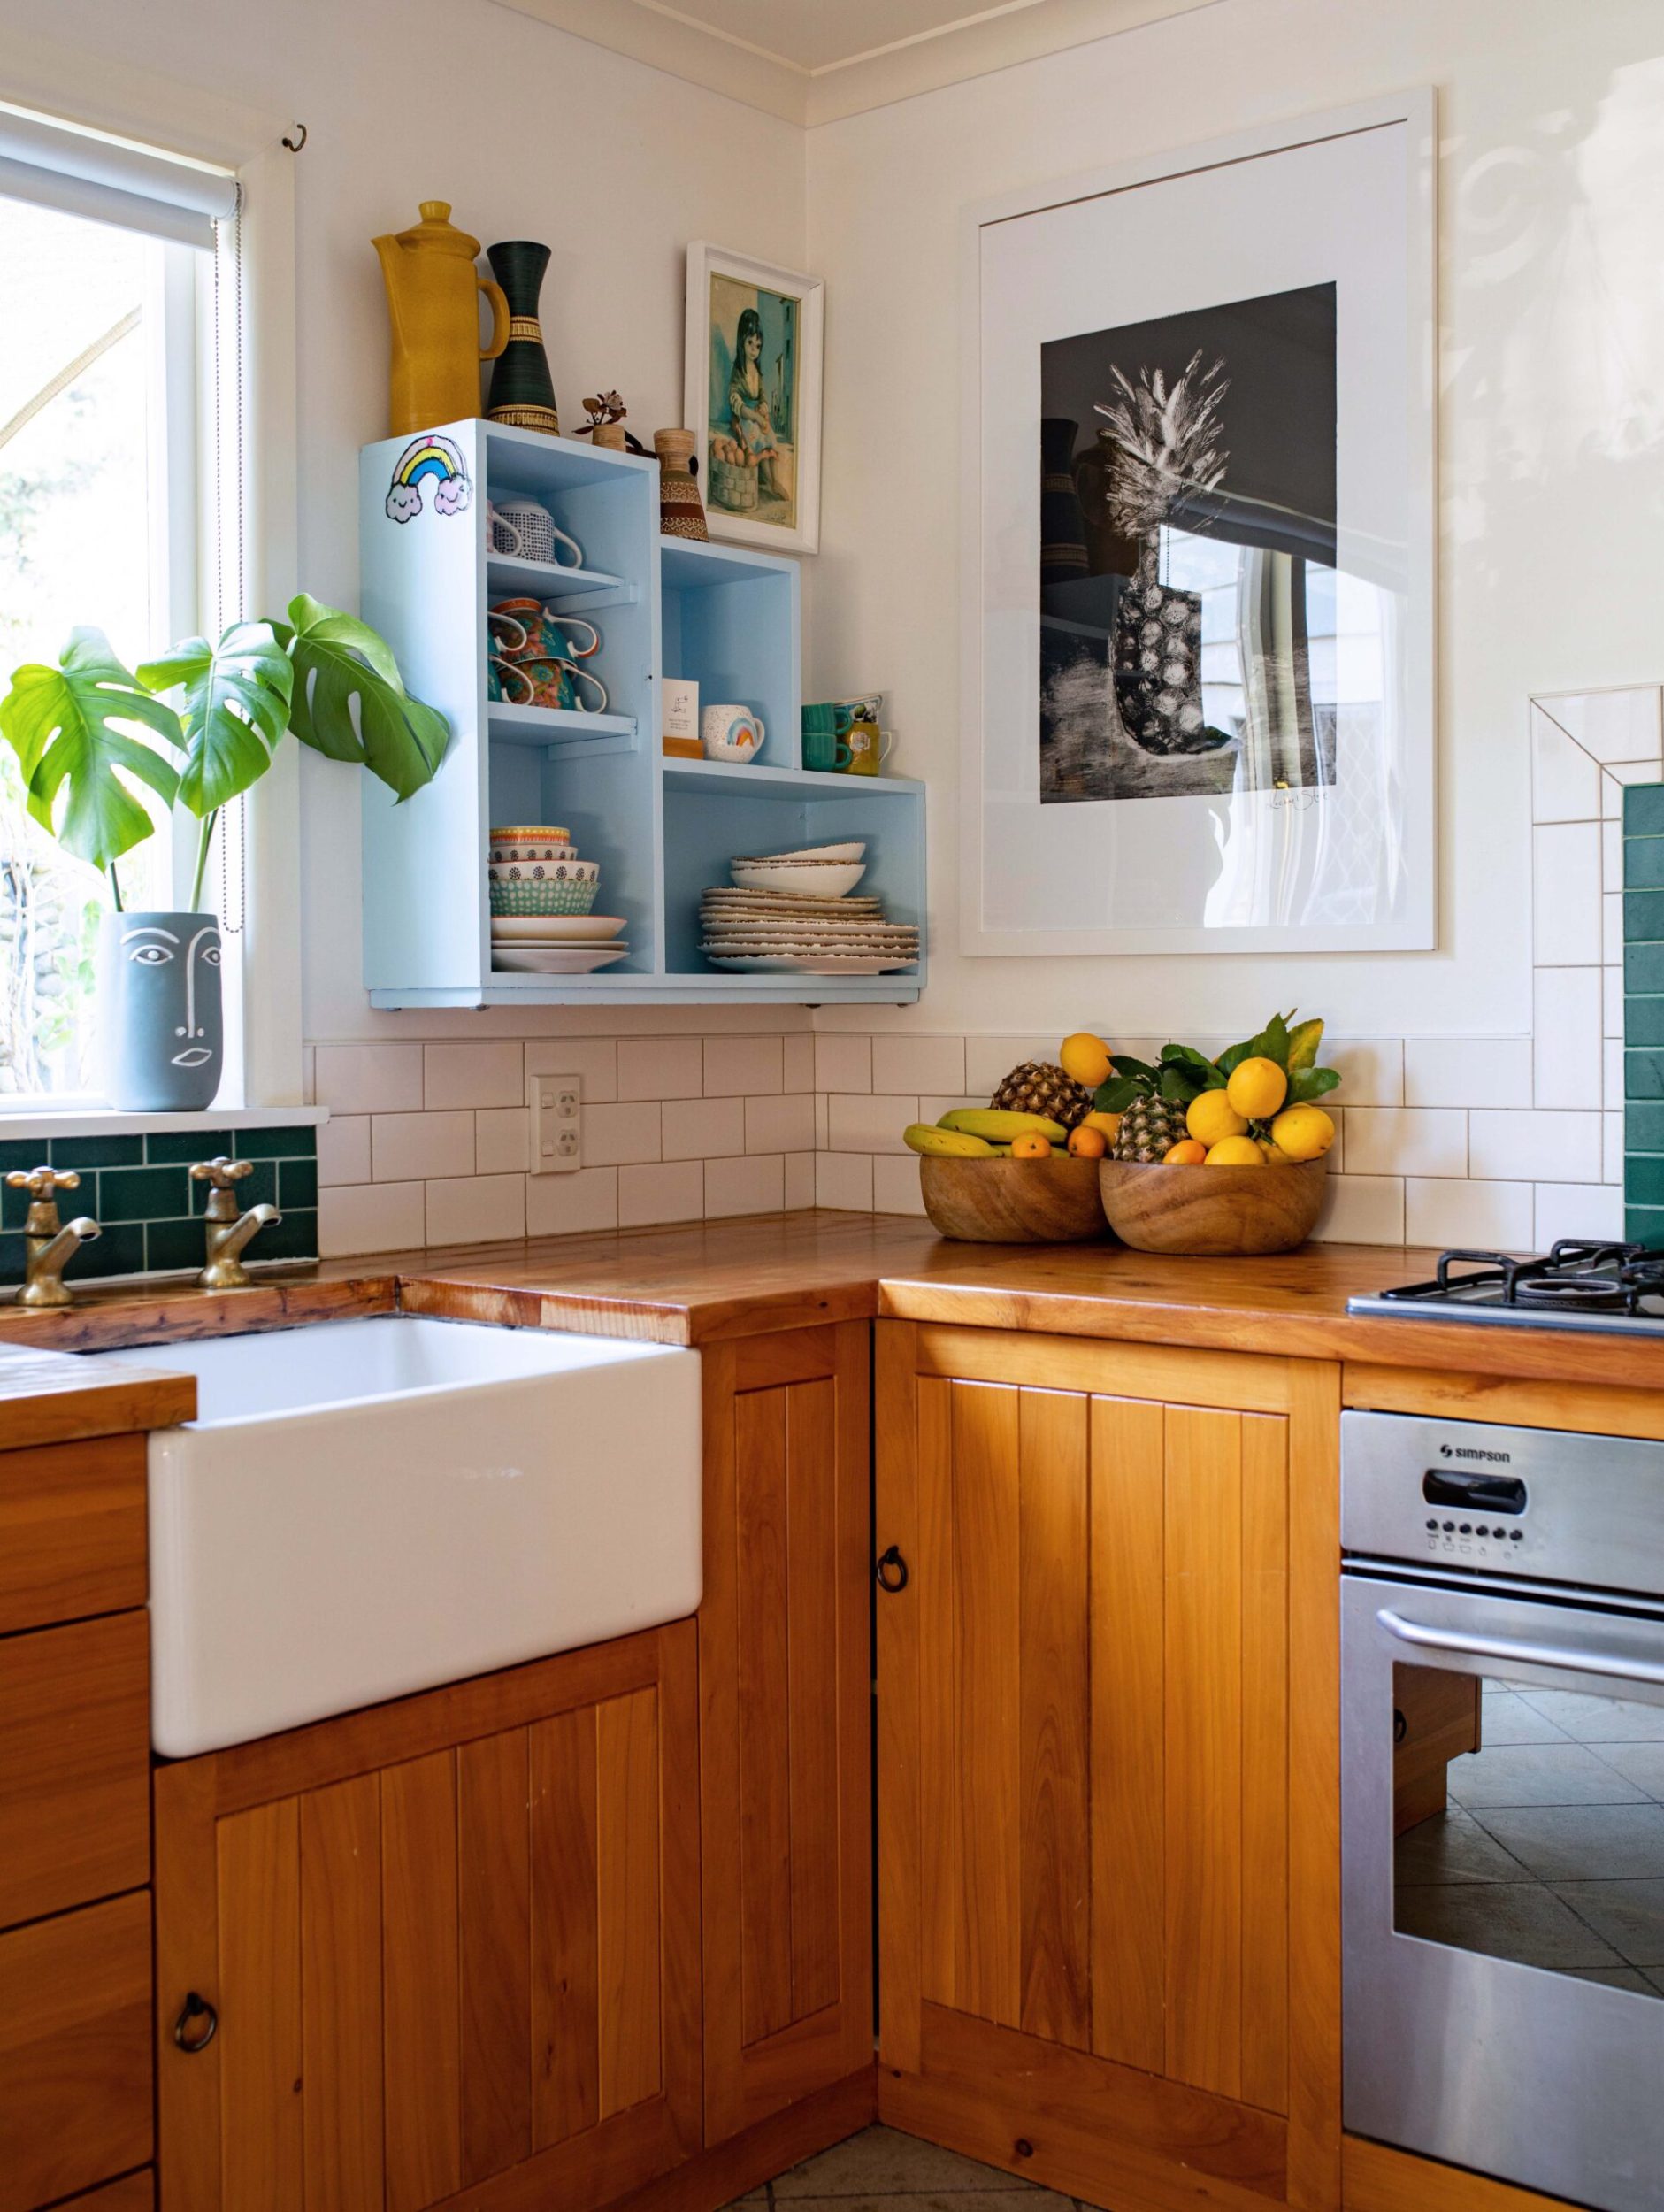 A kitchen with brown wooden cabinets, white floor tiles, a white farmhouse sink and a hanging black and white photo of a pineapple